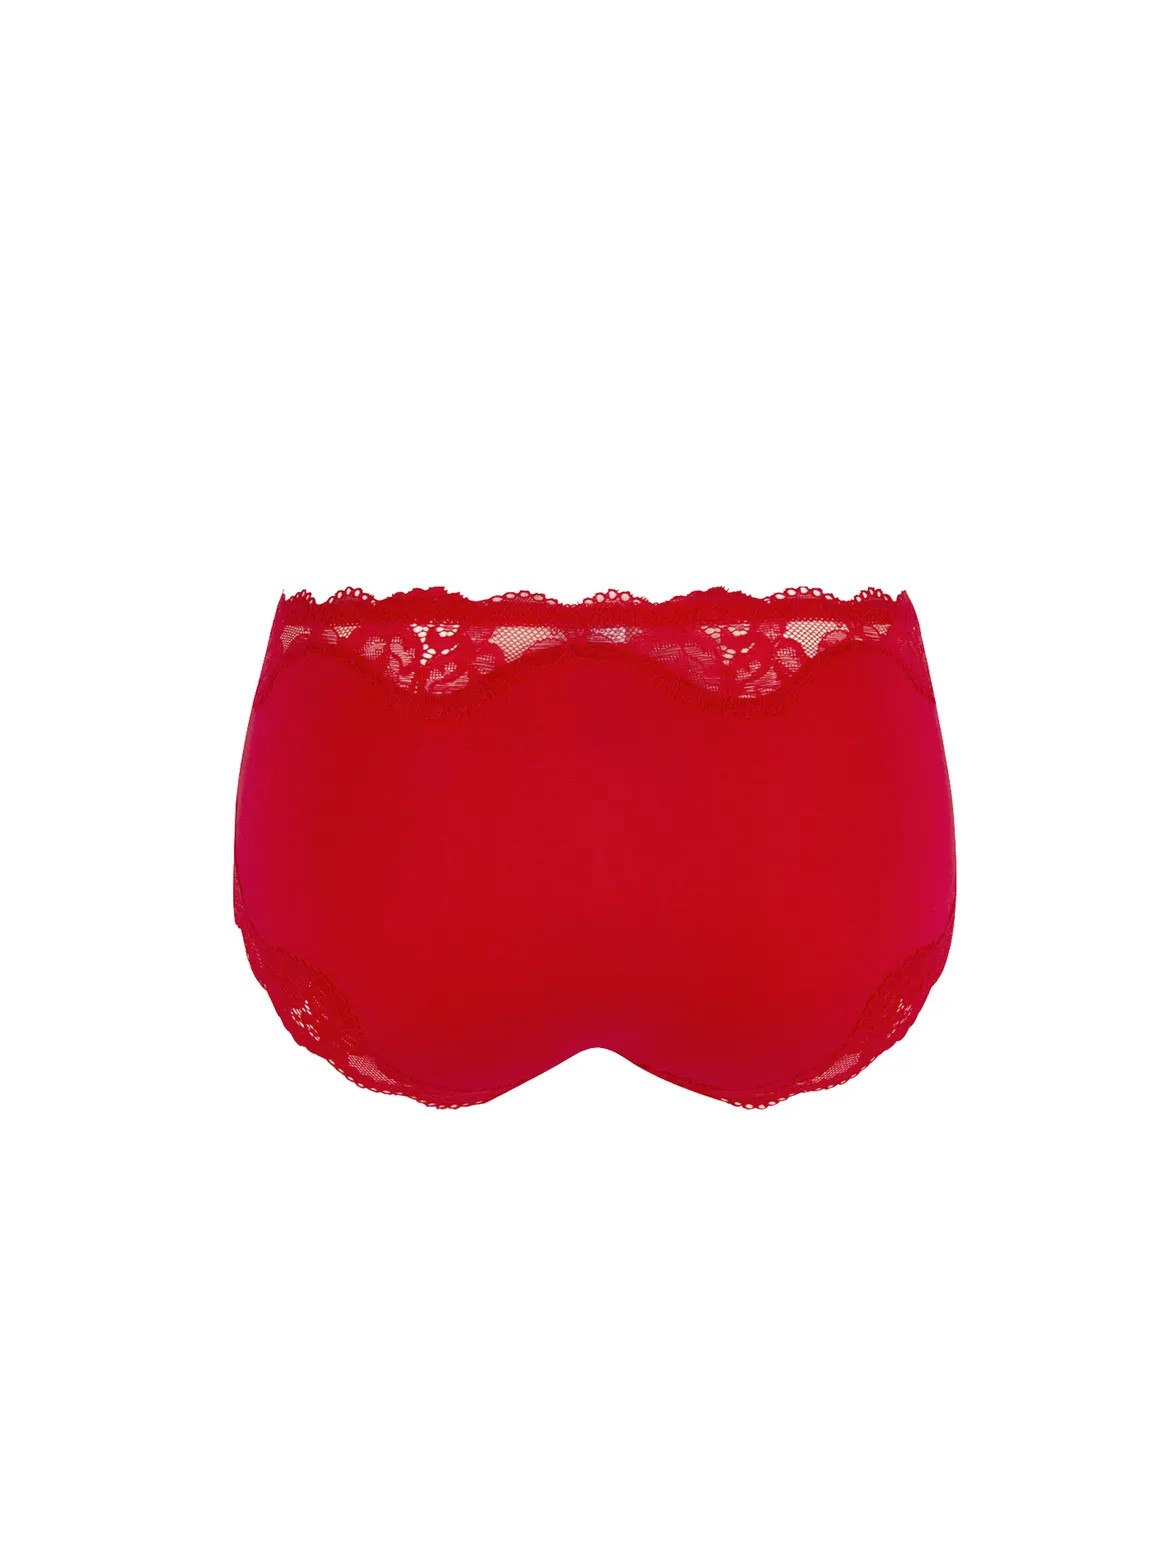 Cami top Simply perfect red ANTIGEL DE LISE CHARMEL